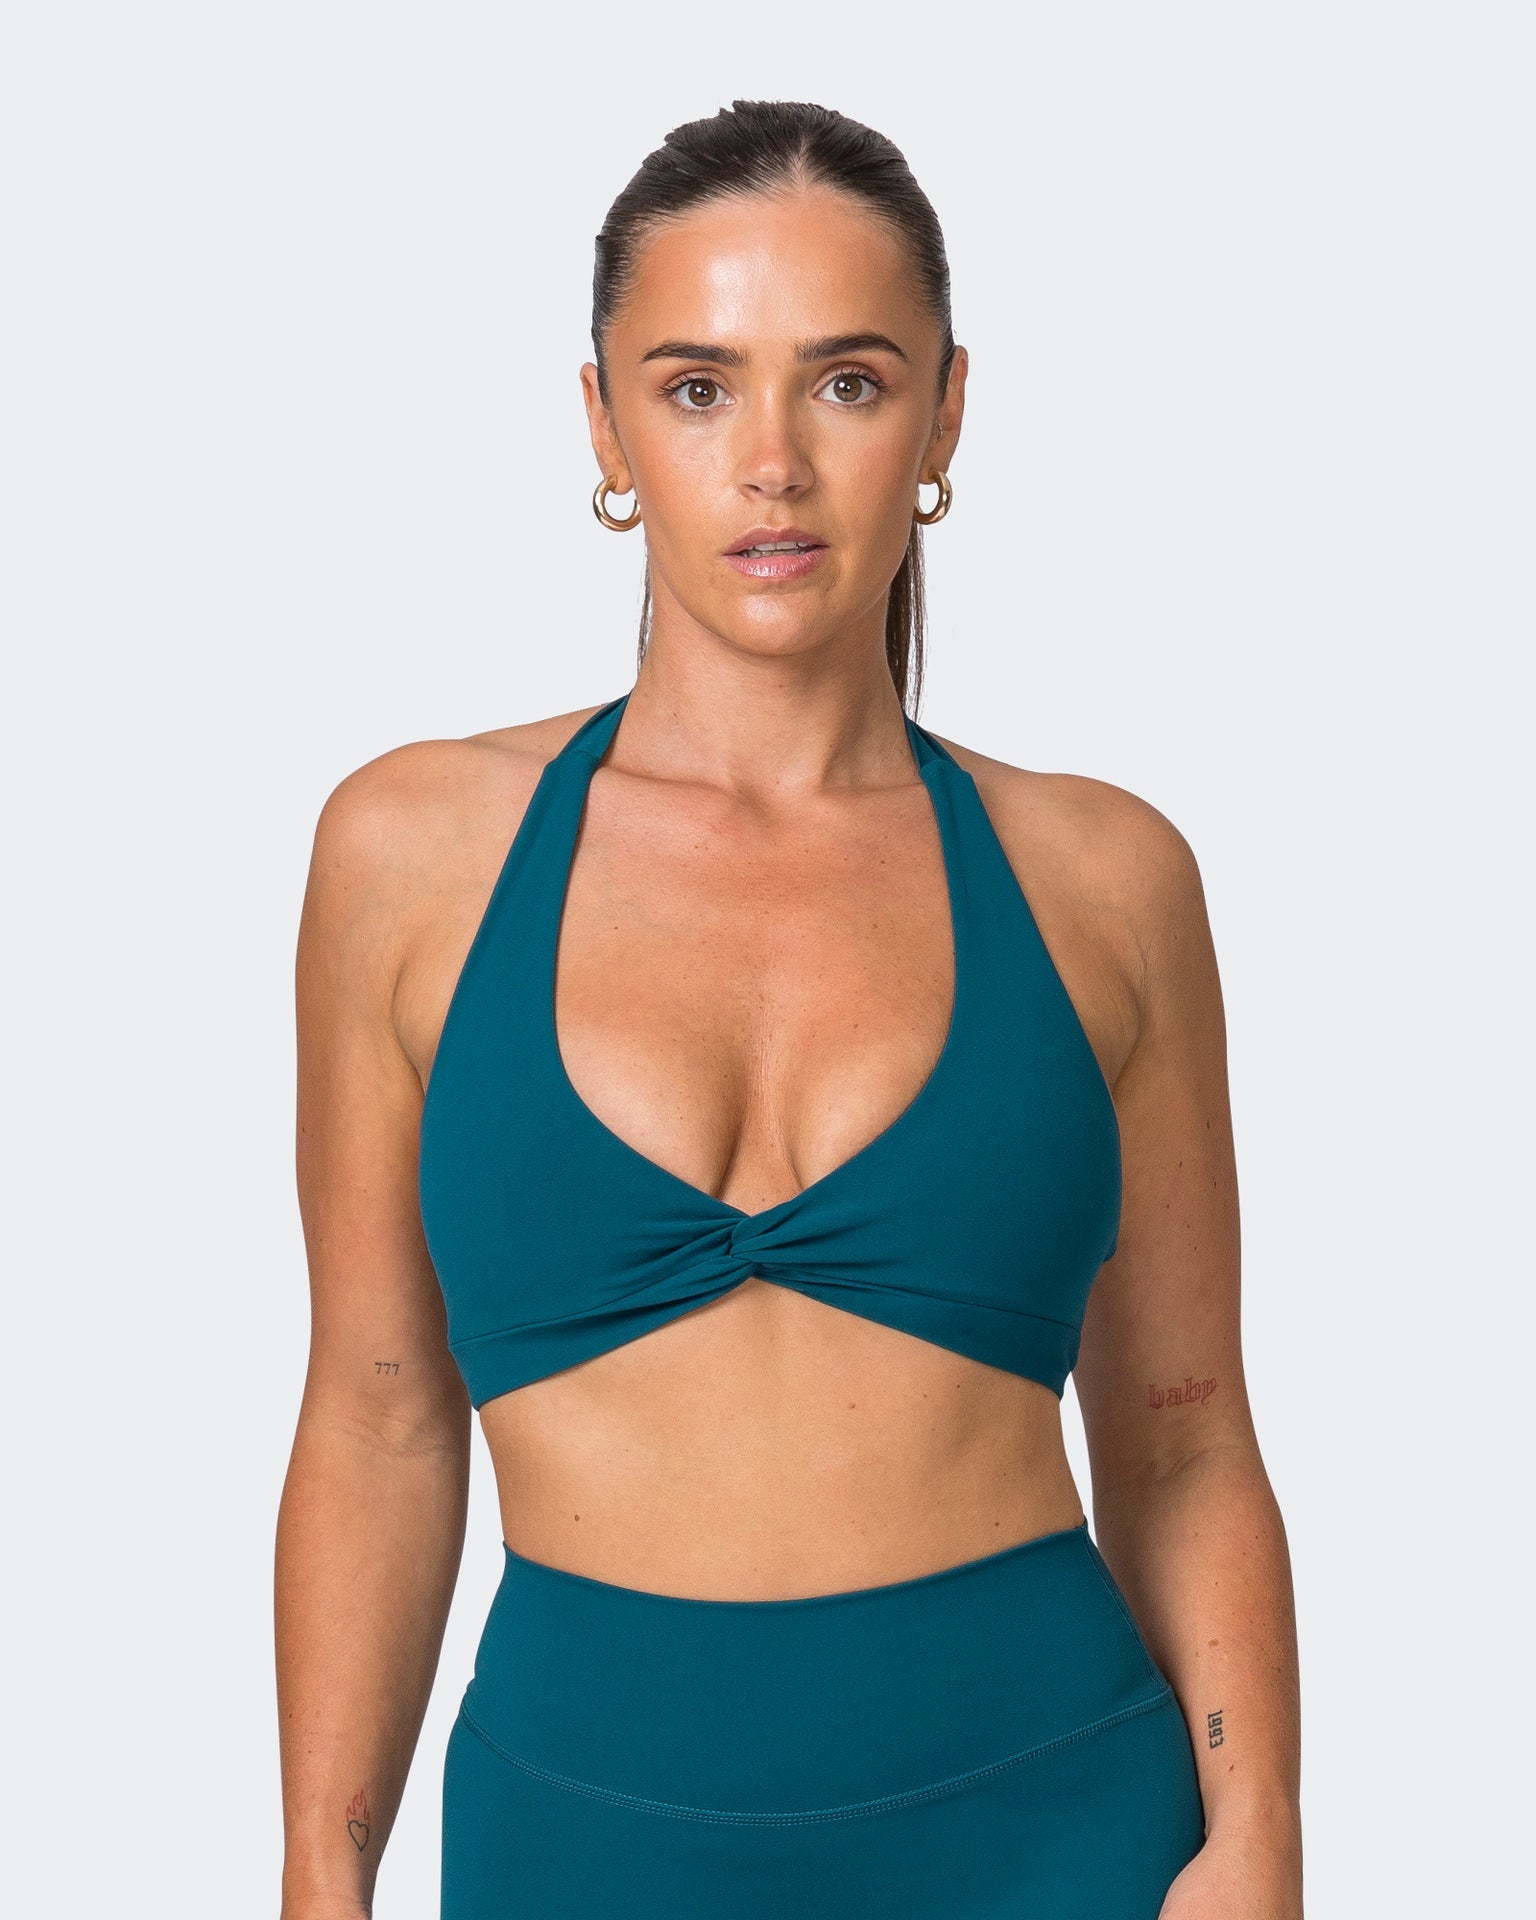 Maternity Activewear - Muscle Nation